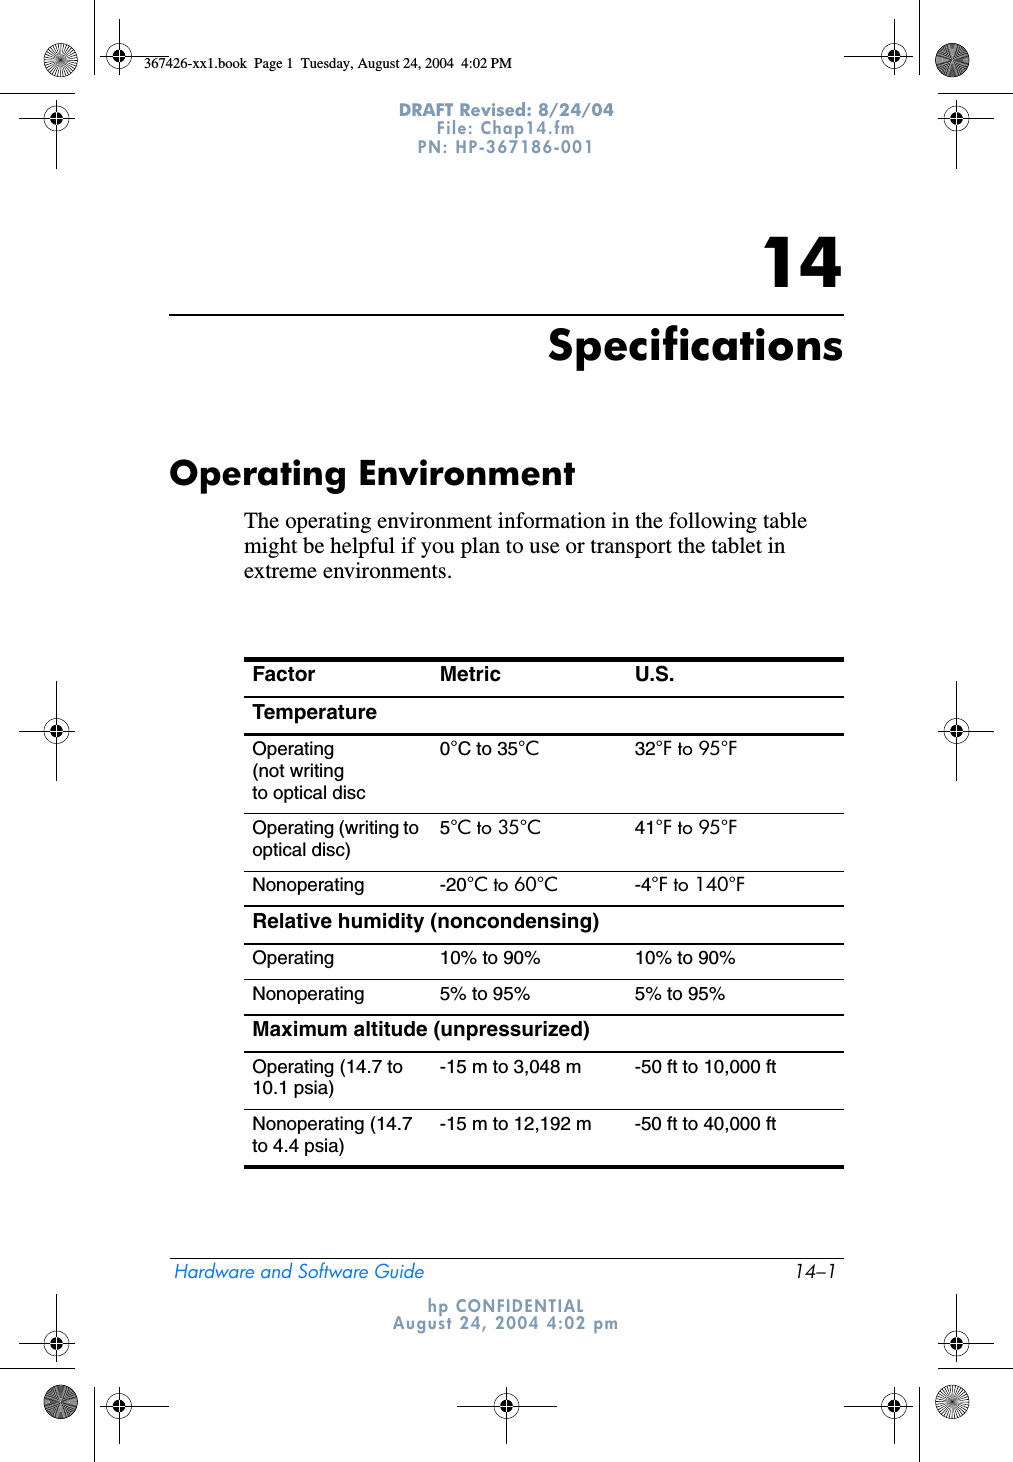 Hardware and Software Guide 14–1DRAFT Revised: 8/24/04File: Chap14.fm PN: HP-367186-001 hp CONFIDENTIALAugust 24, 2004 4:02 pm14SpecificationsOperating EnvironmentThe operating environment information in the following table might be helpful if you plan to use or transport the tablet in extreme environments.Factor Metric U.S.TemperatureOperating (not writing to optical disc0°C to 35°C 32°F to 95°FOperating (writing to optical disc)5°C to 35°C 41°F to 95°FNonoperating -20°C to 60°C -4°F to 140°FRelative humidity (noncondensing)Operating 10% to 90% 10% to 90%Nonoperating 5% to 95% 5% to 95%Maximum altitude (unpressurized)Operating (14.7 to 10.1 psia)-15 m to 3,048 m -50 ft to 10,000 ftNonoperating (14.7 to 4.4 psia)-15 m to 12,192 m -50 ft to 40,000 ft367426-xx1.book  Page 1  Tuesday, August 24, 2004  4:02 PM